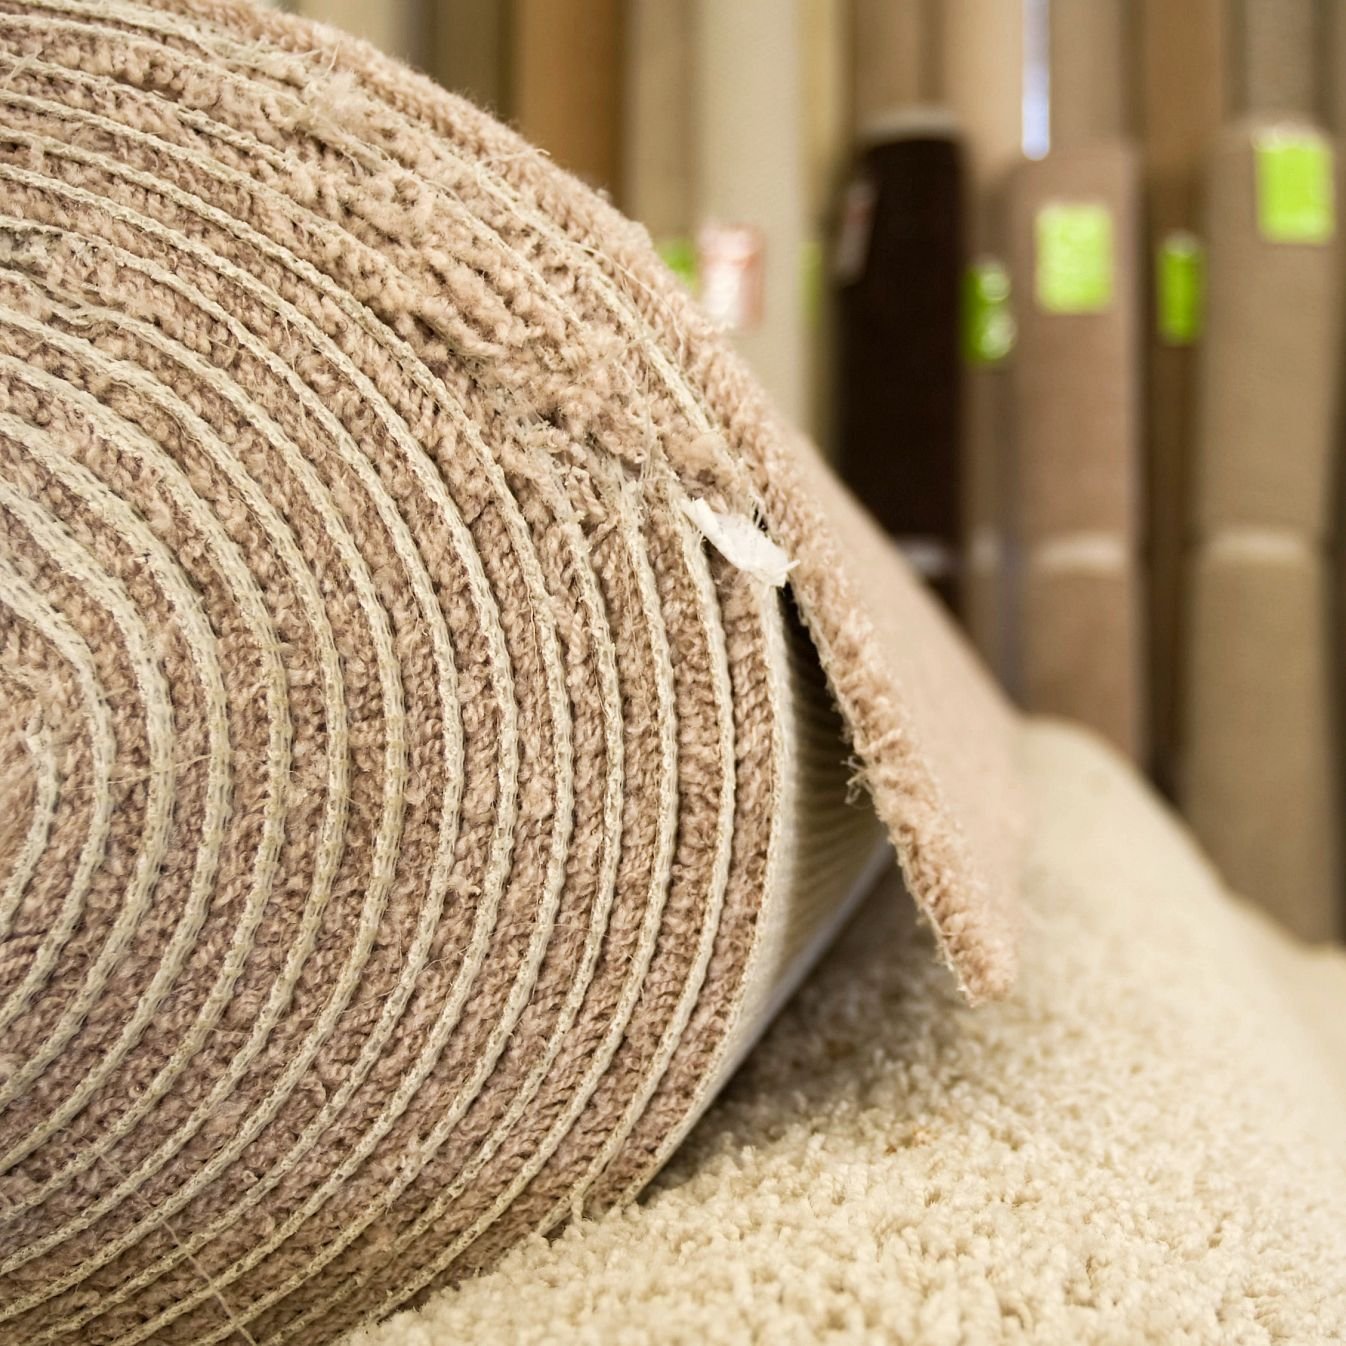 Carpet rolls in warehouse from The Carpet Shoppe Inc in Tulare, CA